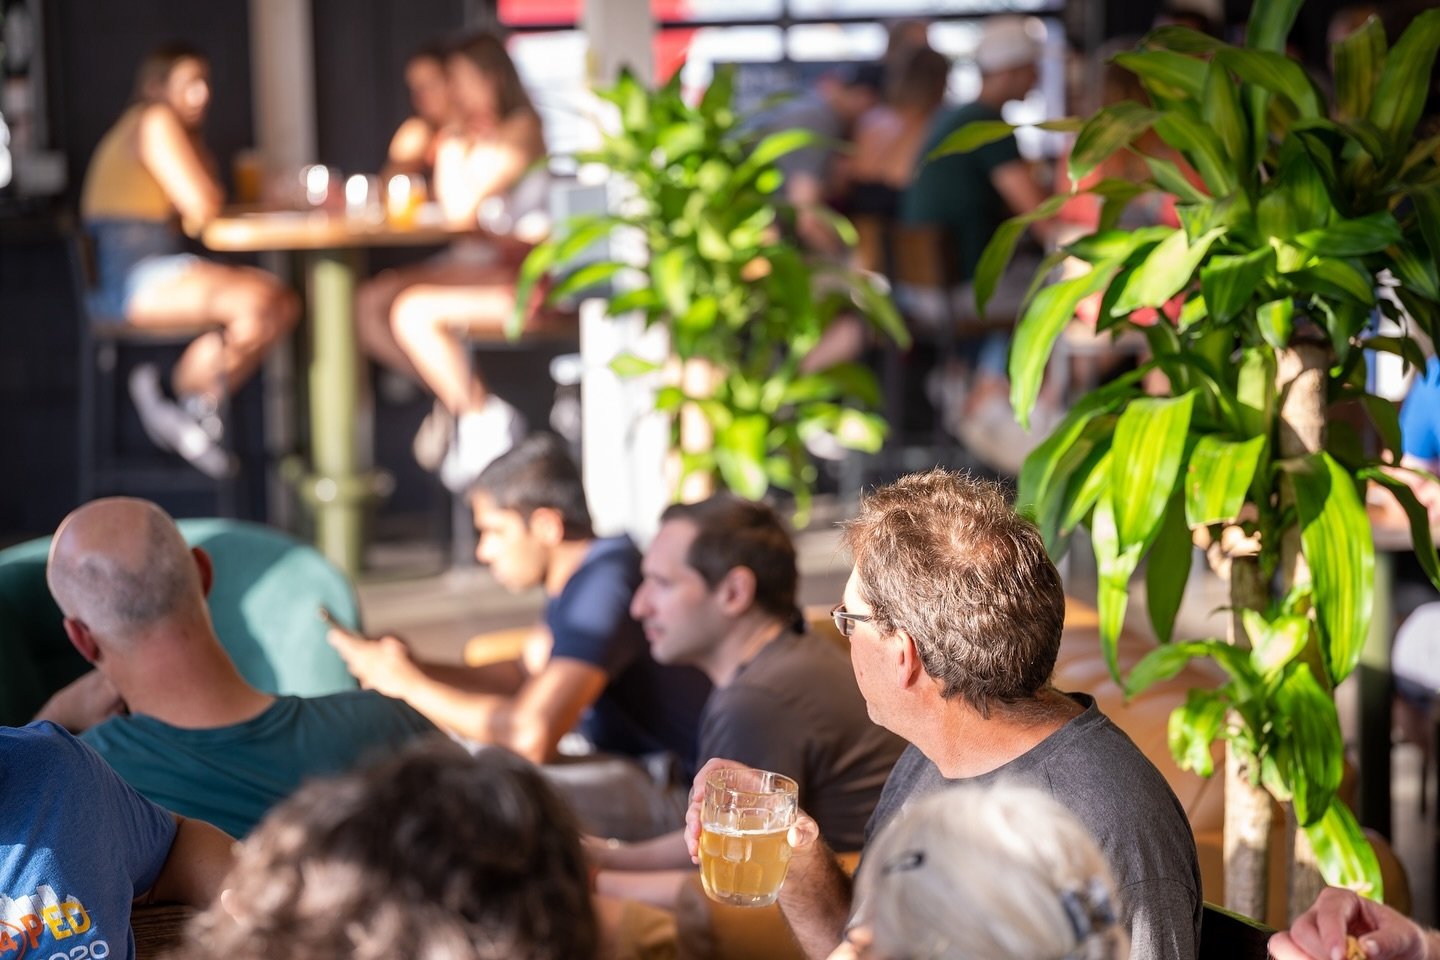 The sun is shining and the beer is flowing🍻We can&rsquo;t wait to see you today, tomorrow or this weekend in our taproom &mdash; grab your people and come on in for a drink!